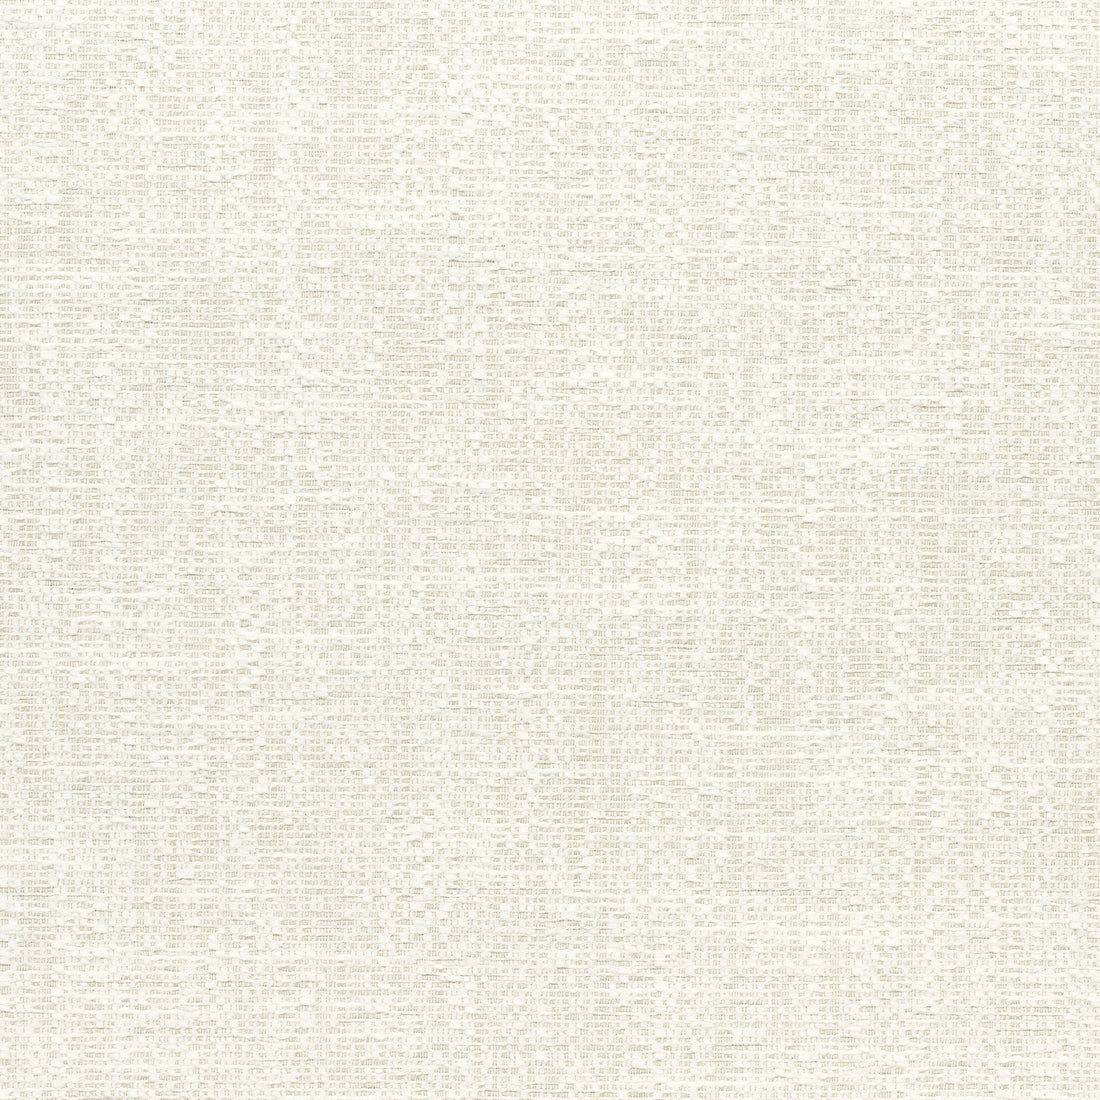 Freeport fabric in almond color - pattern number W74617 - by Thibaut in the Festival collection